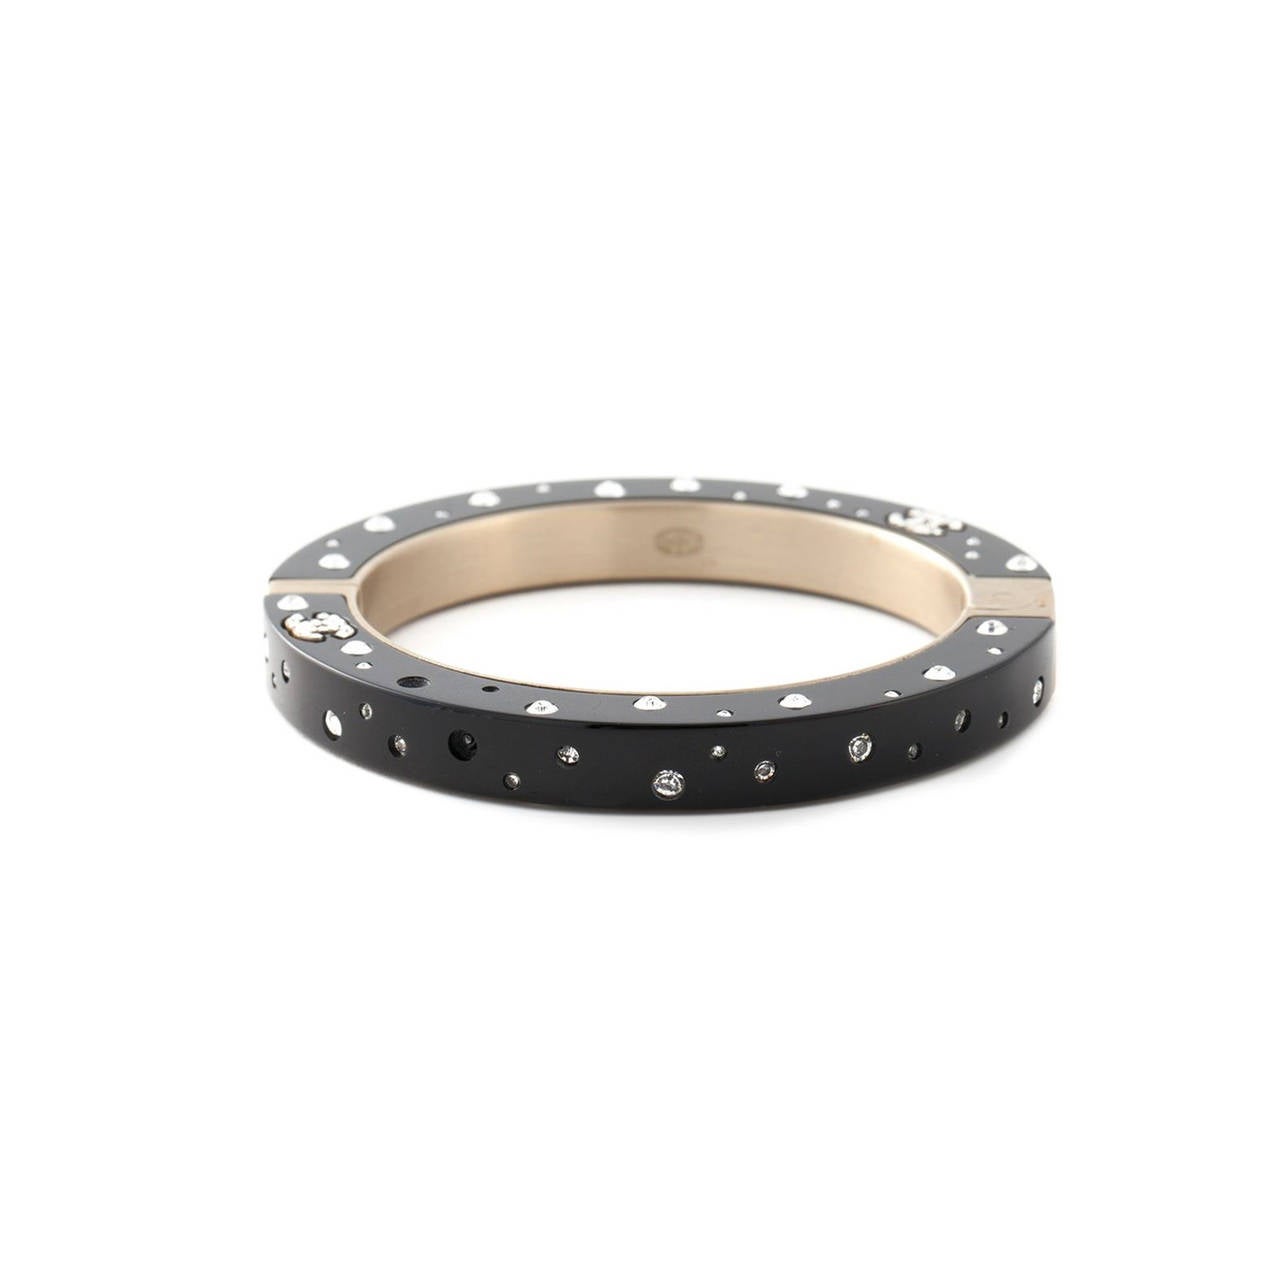 This black resin bangle from Chanel features all round Swarovski crystals and iconiic Chanel branding.

Measurements: Circumference: 17 cm, Width: 1 cm

Material: Resin, Swarovski Crystals

Colour: Black, Clear